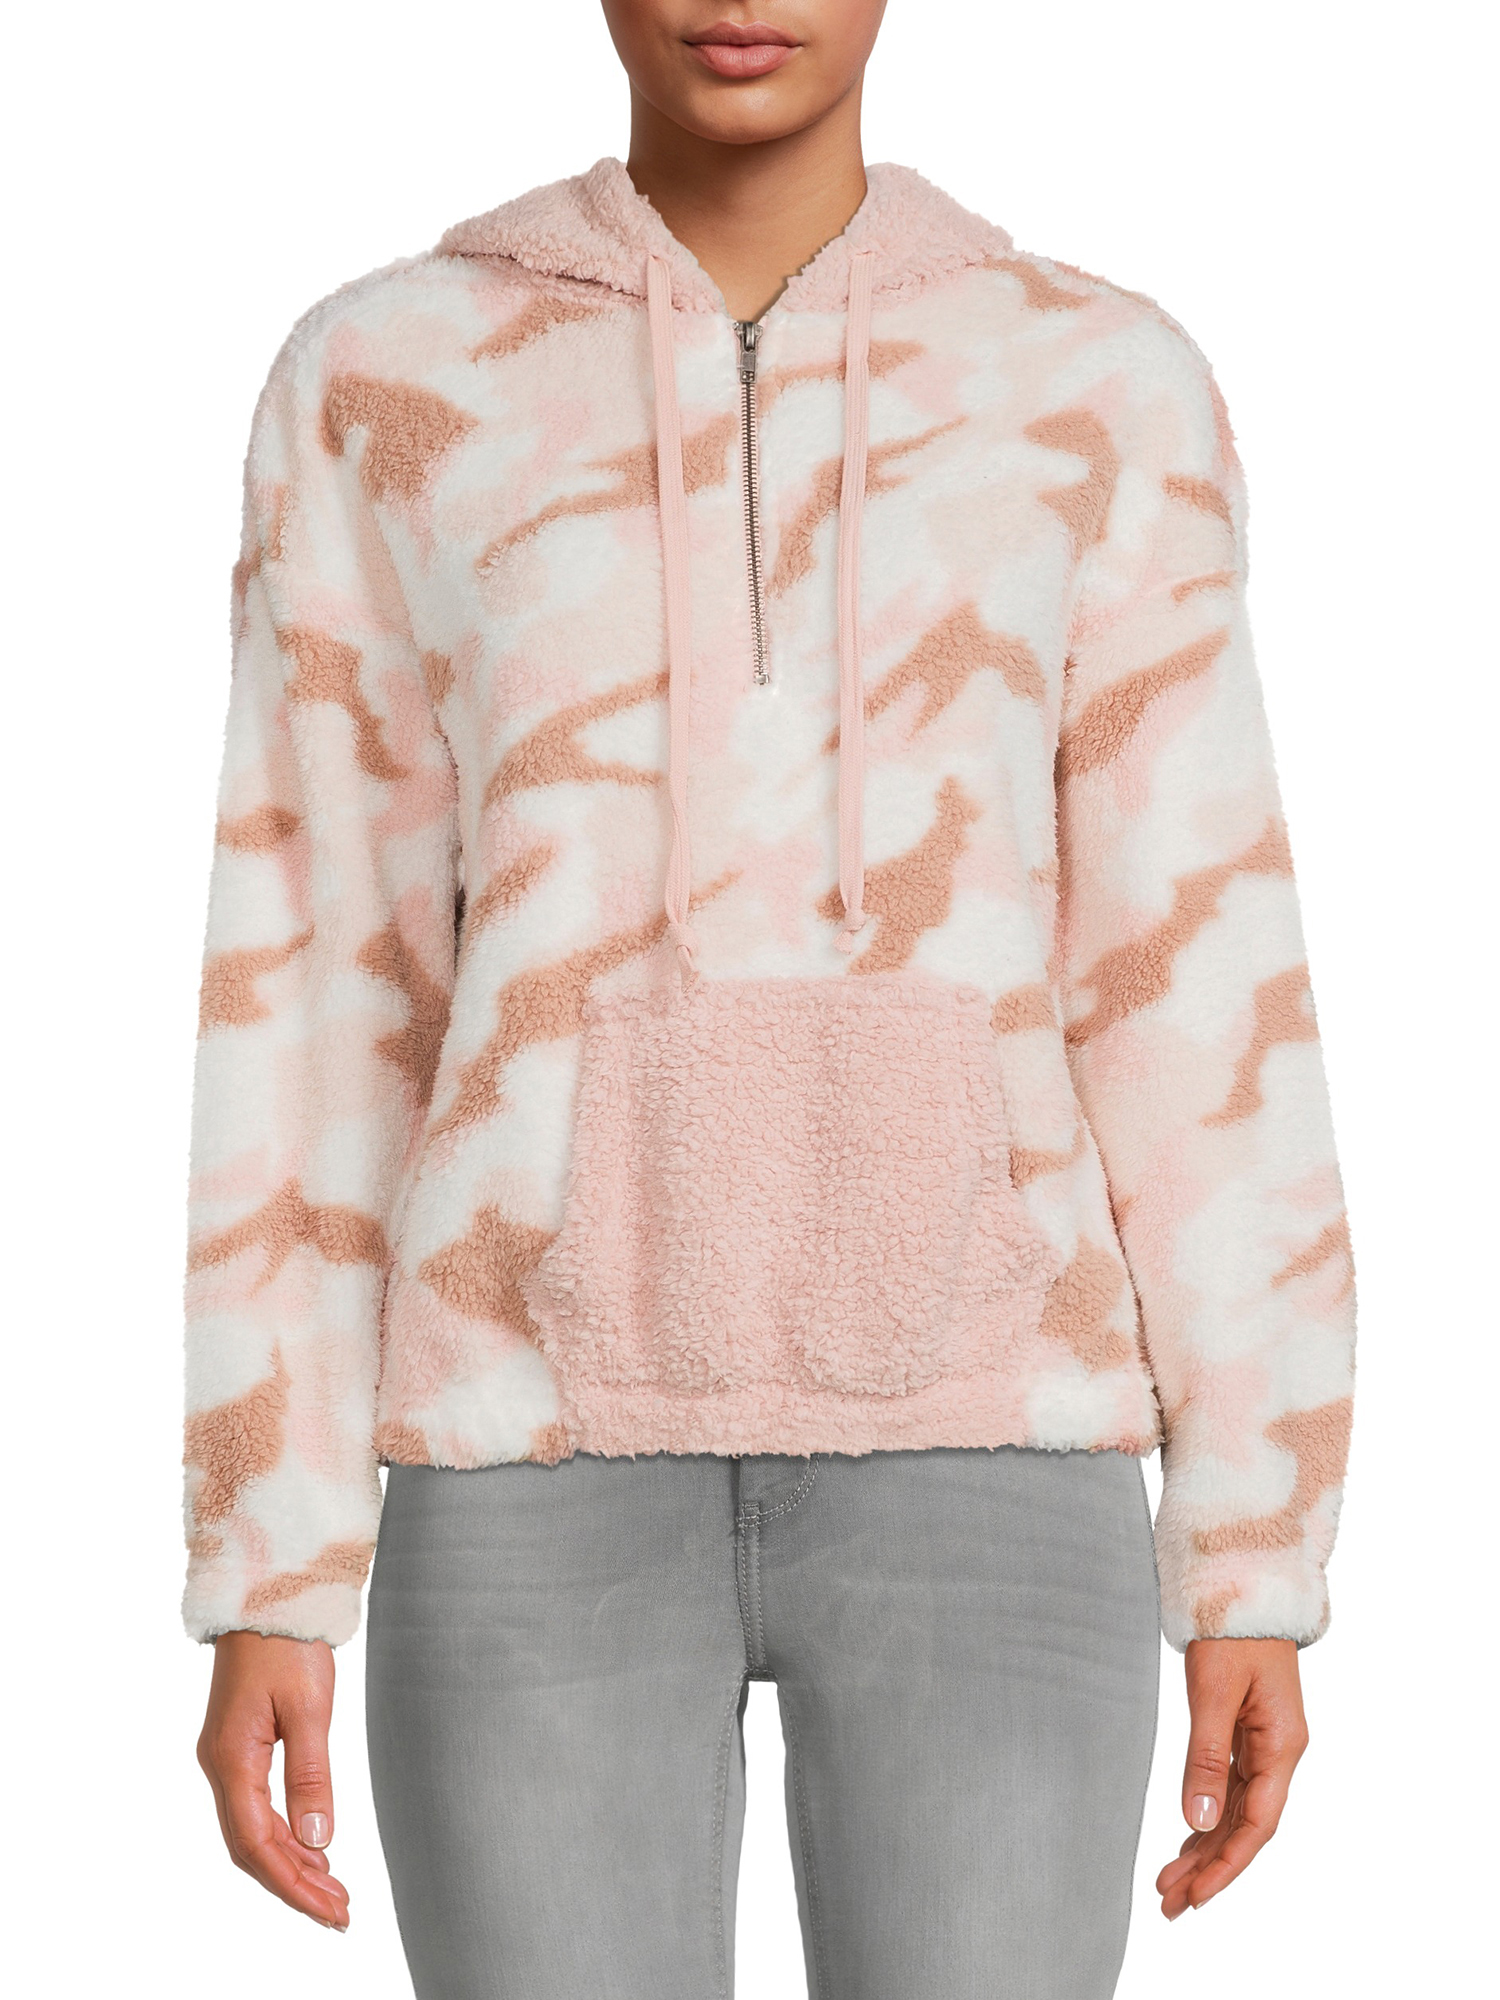 Como Blu Women's Athleisure Printed Baby Faux Sherpa Pullover - image 1 of 5